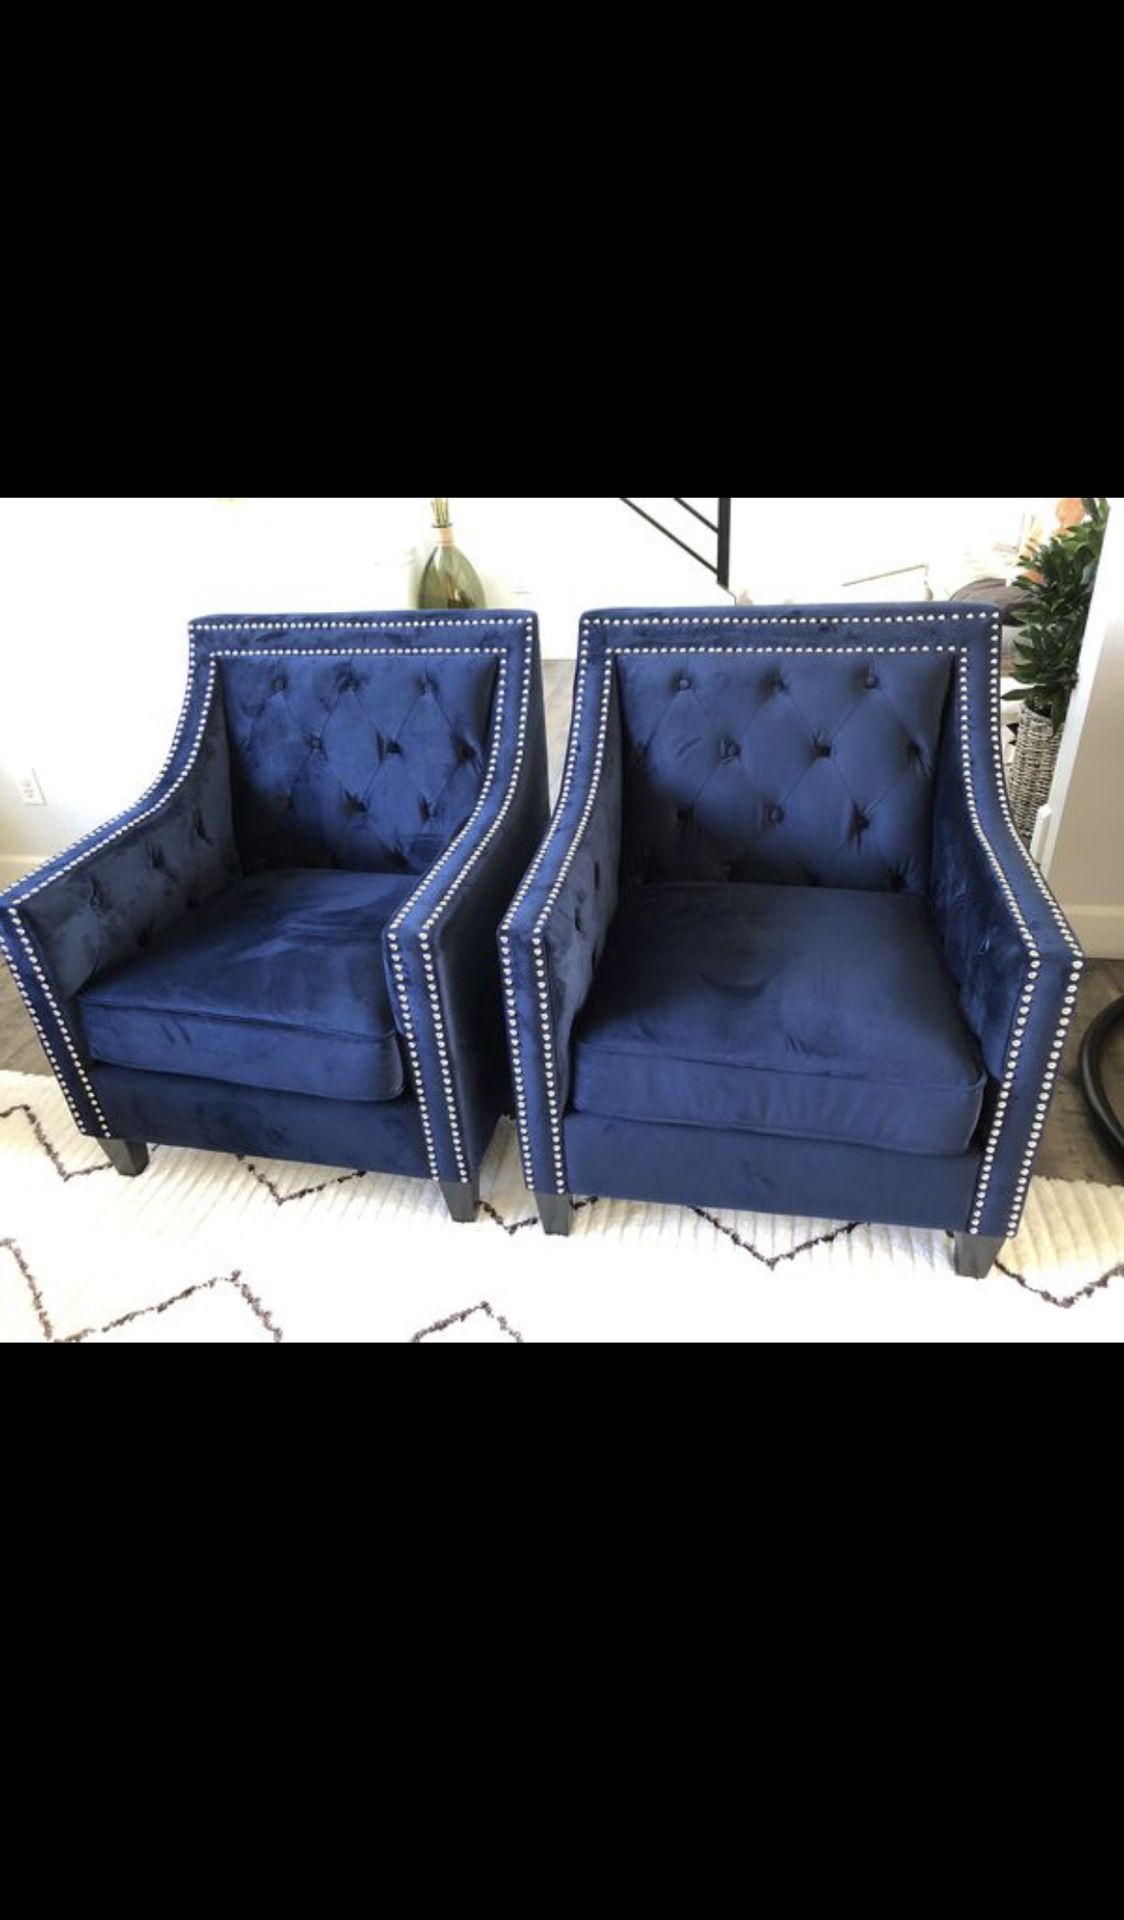 BLUE VELVET TUFTED ACCENT CHAIRS BRAND NEW ($290 EACH/$580 BOTH)